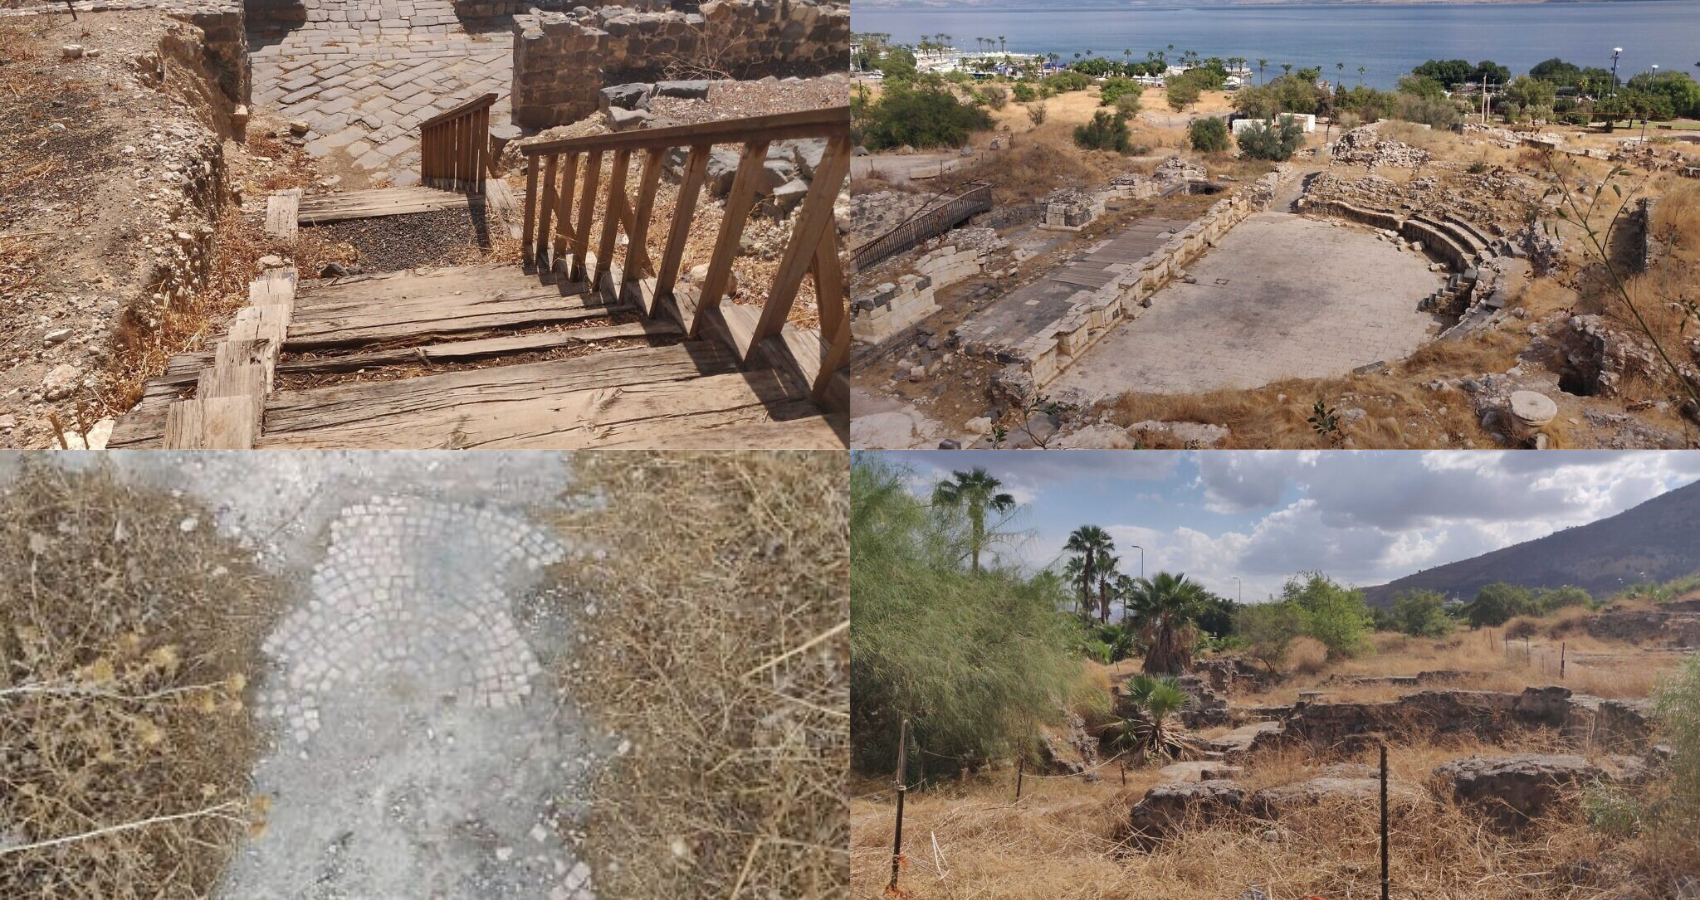 After years of neglect, ‘rare opportunity’ opens up for Tiberias archaeological gems